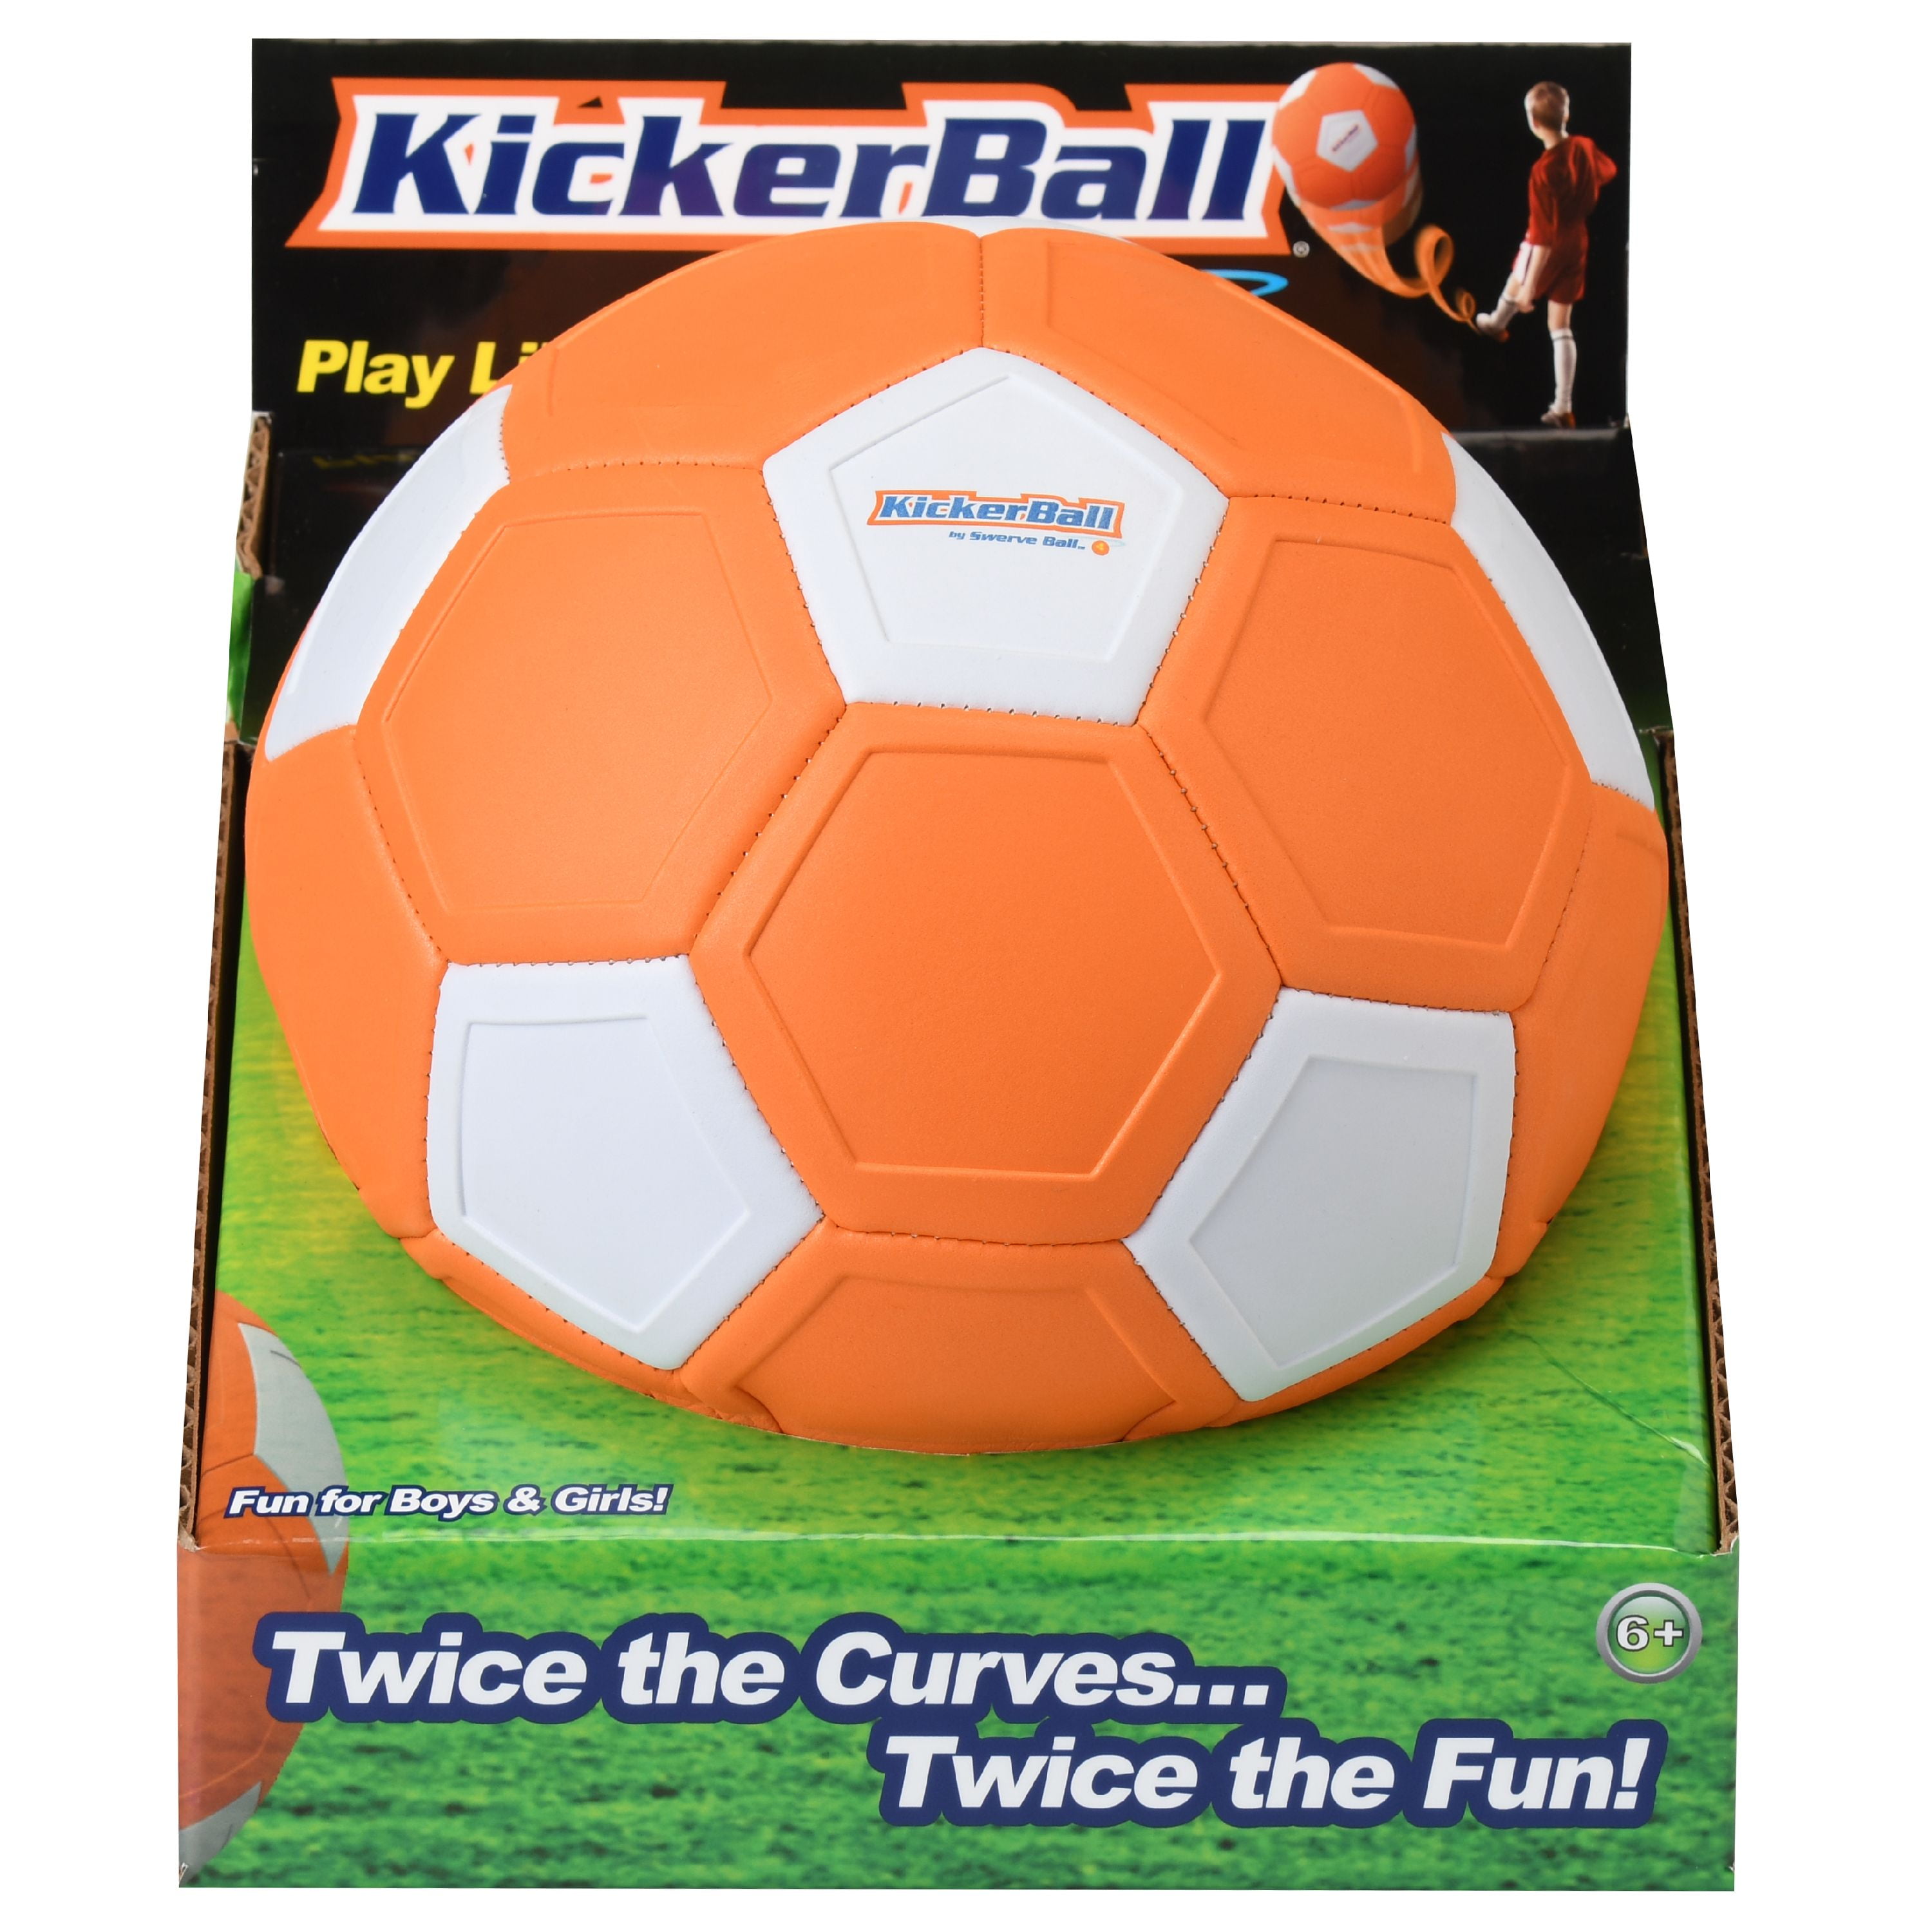 Kickerball By Swerve Ball Kids Childrens Play Toys Outdoor Football Soccerball 